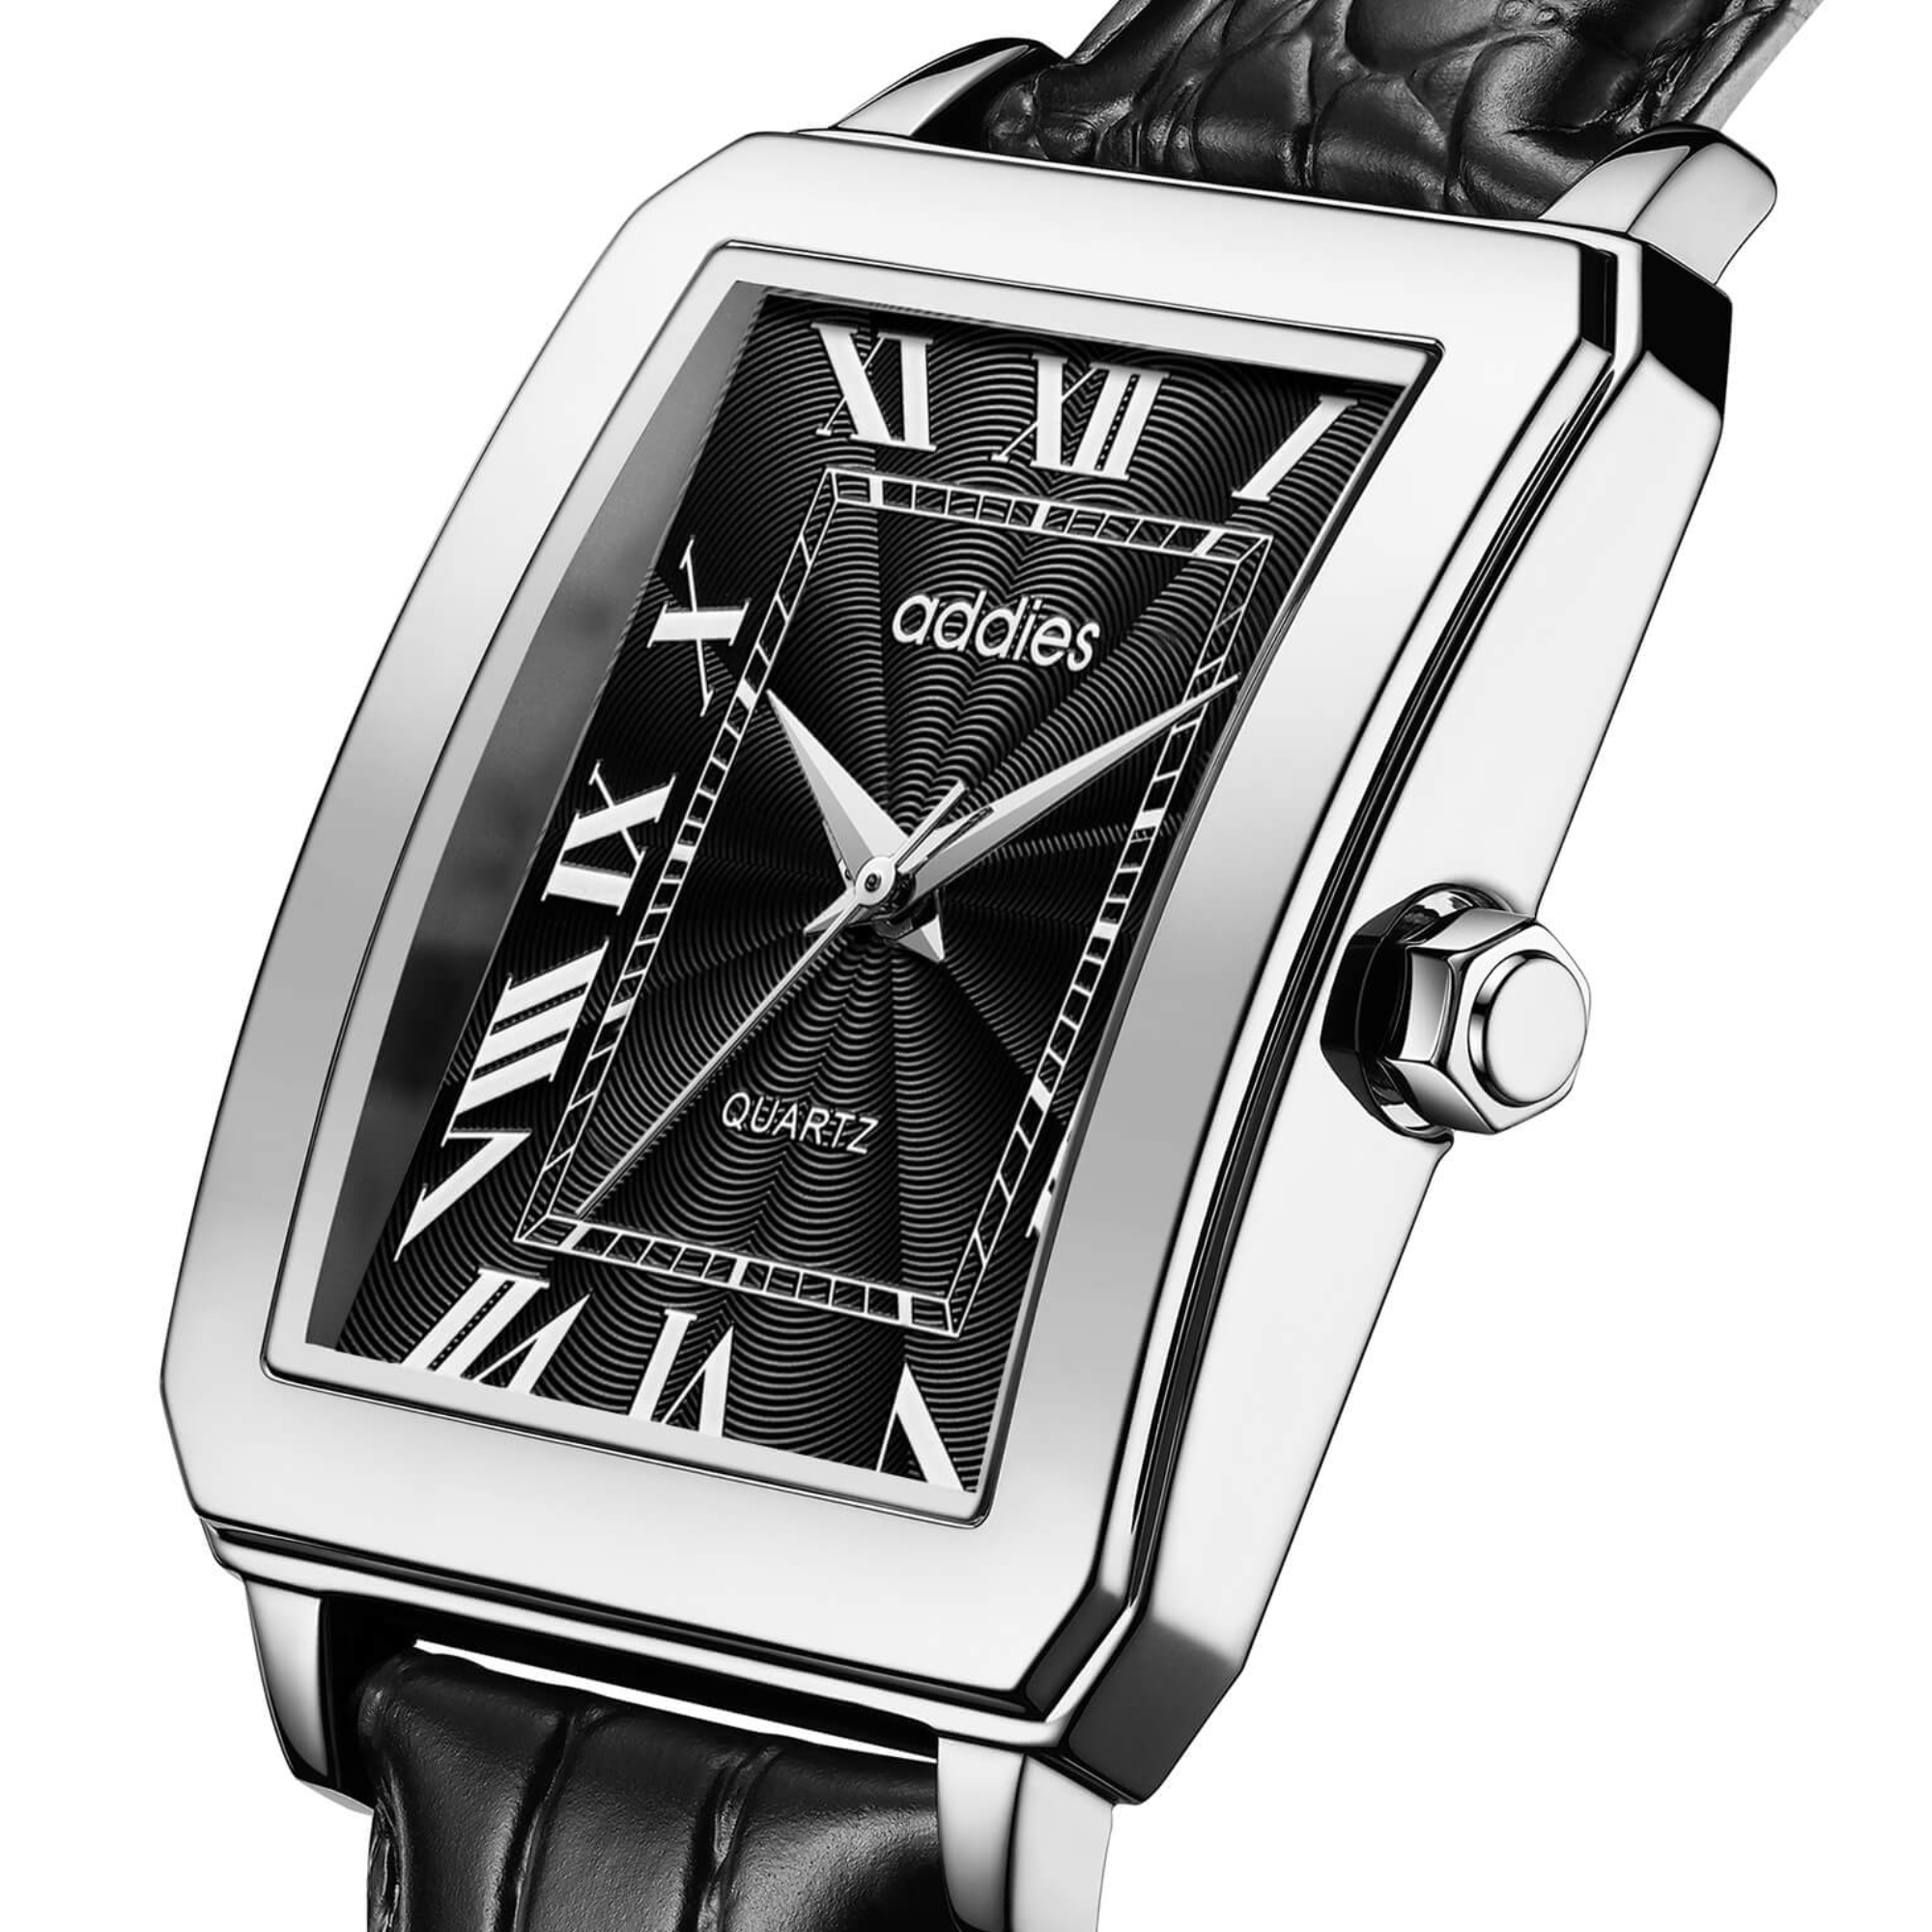 ADDIES Men's Quartz Analog Watch with Square Dial Leather Strap（MY-RM05）- Black Dial